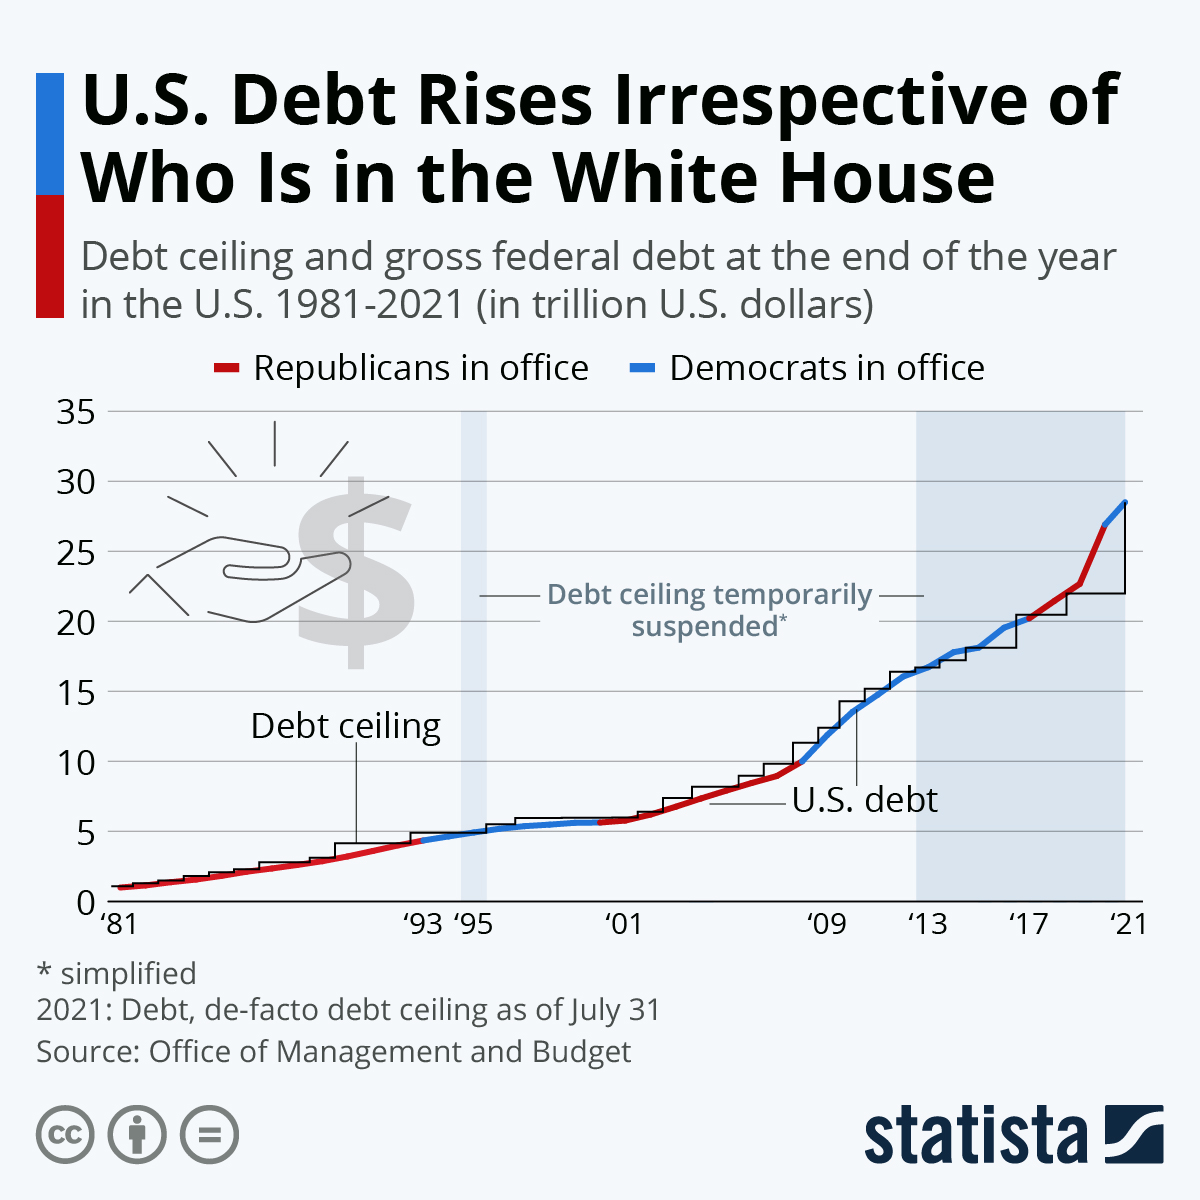 U.S. Debt Rises Irrespective of Who Is in the White House